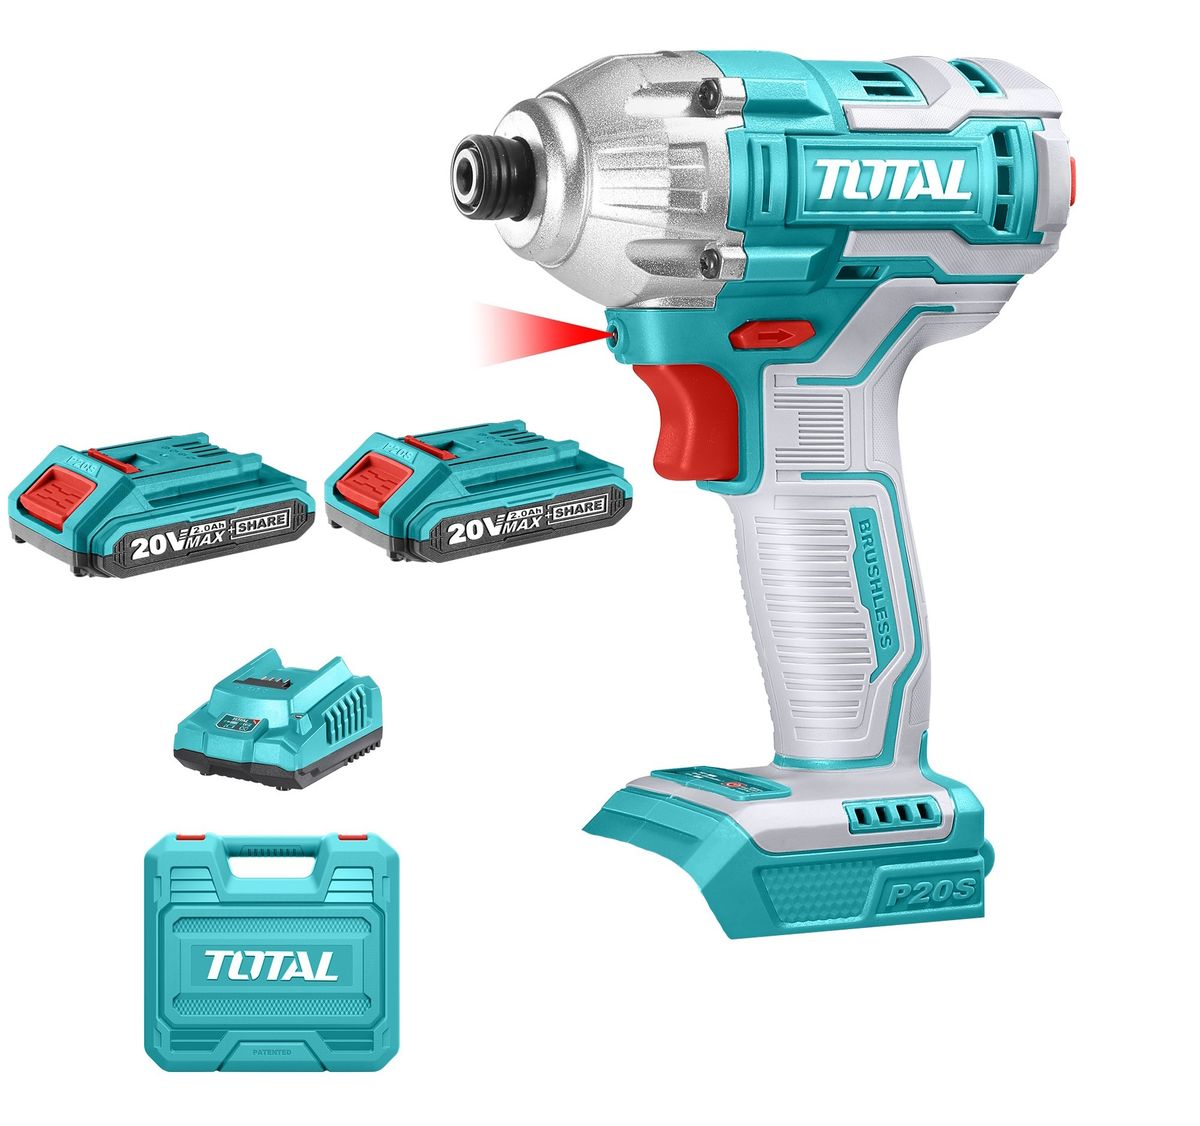 Total Tools 20V Lithium-Ion 170nm Impact Driver with Battery and Charger